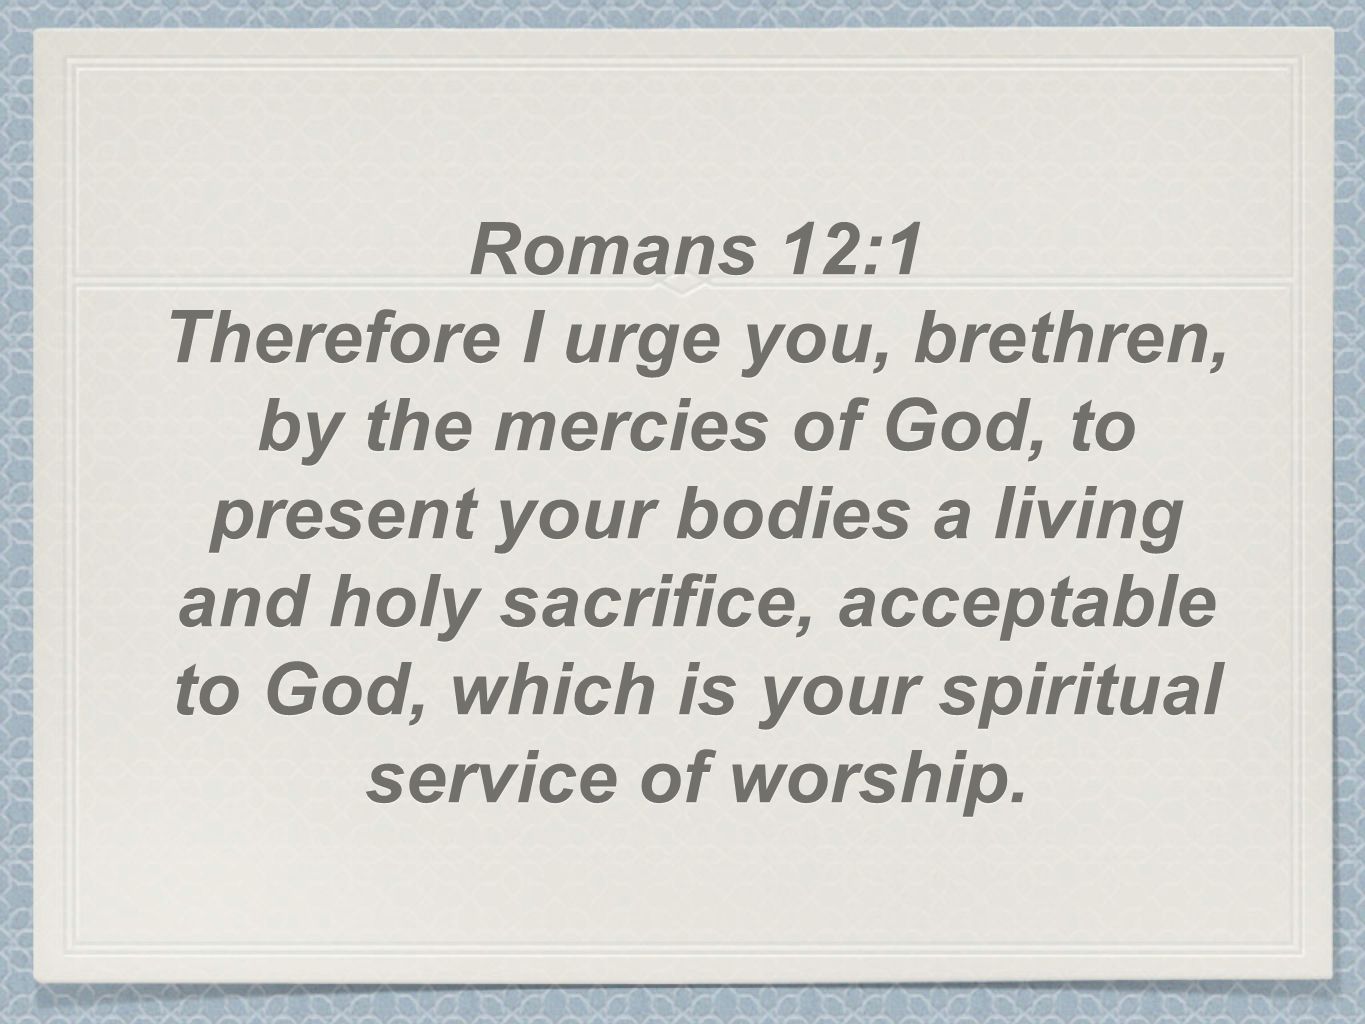 Romans 12:1 Therefore I urge you, brethren, by the mercies of God, to present your bodies a living and holy sacrifice, acceptable to God, which is your spiritual service of worship.